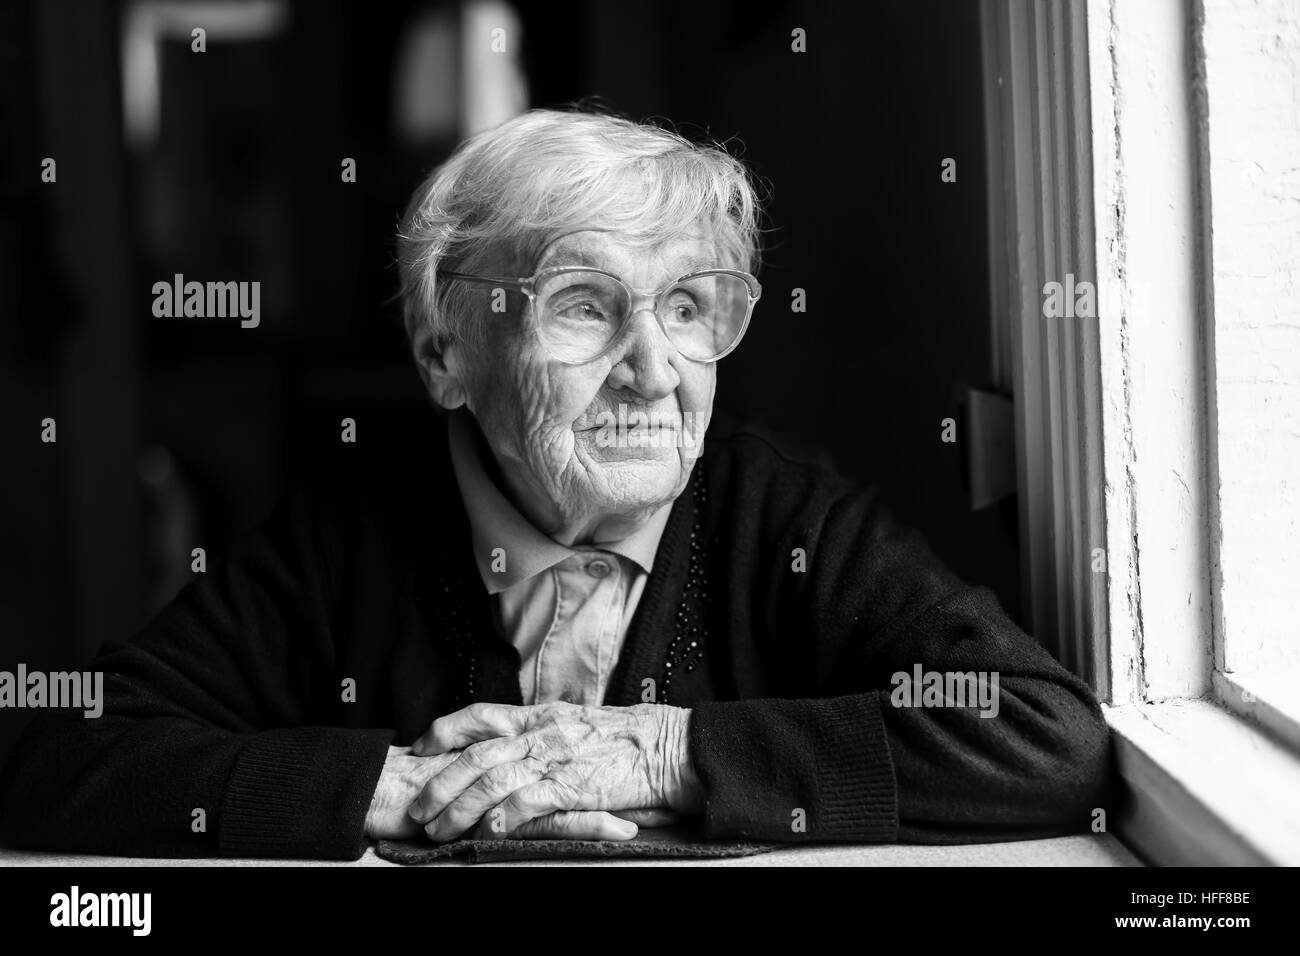 An elderly woman with glasses sitting at a table, a black-and-white photo. Stock Photo